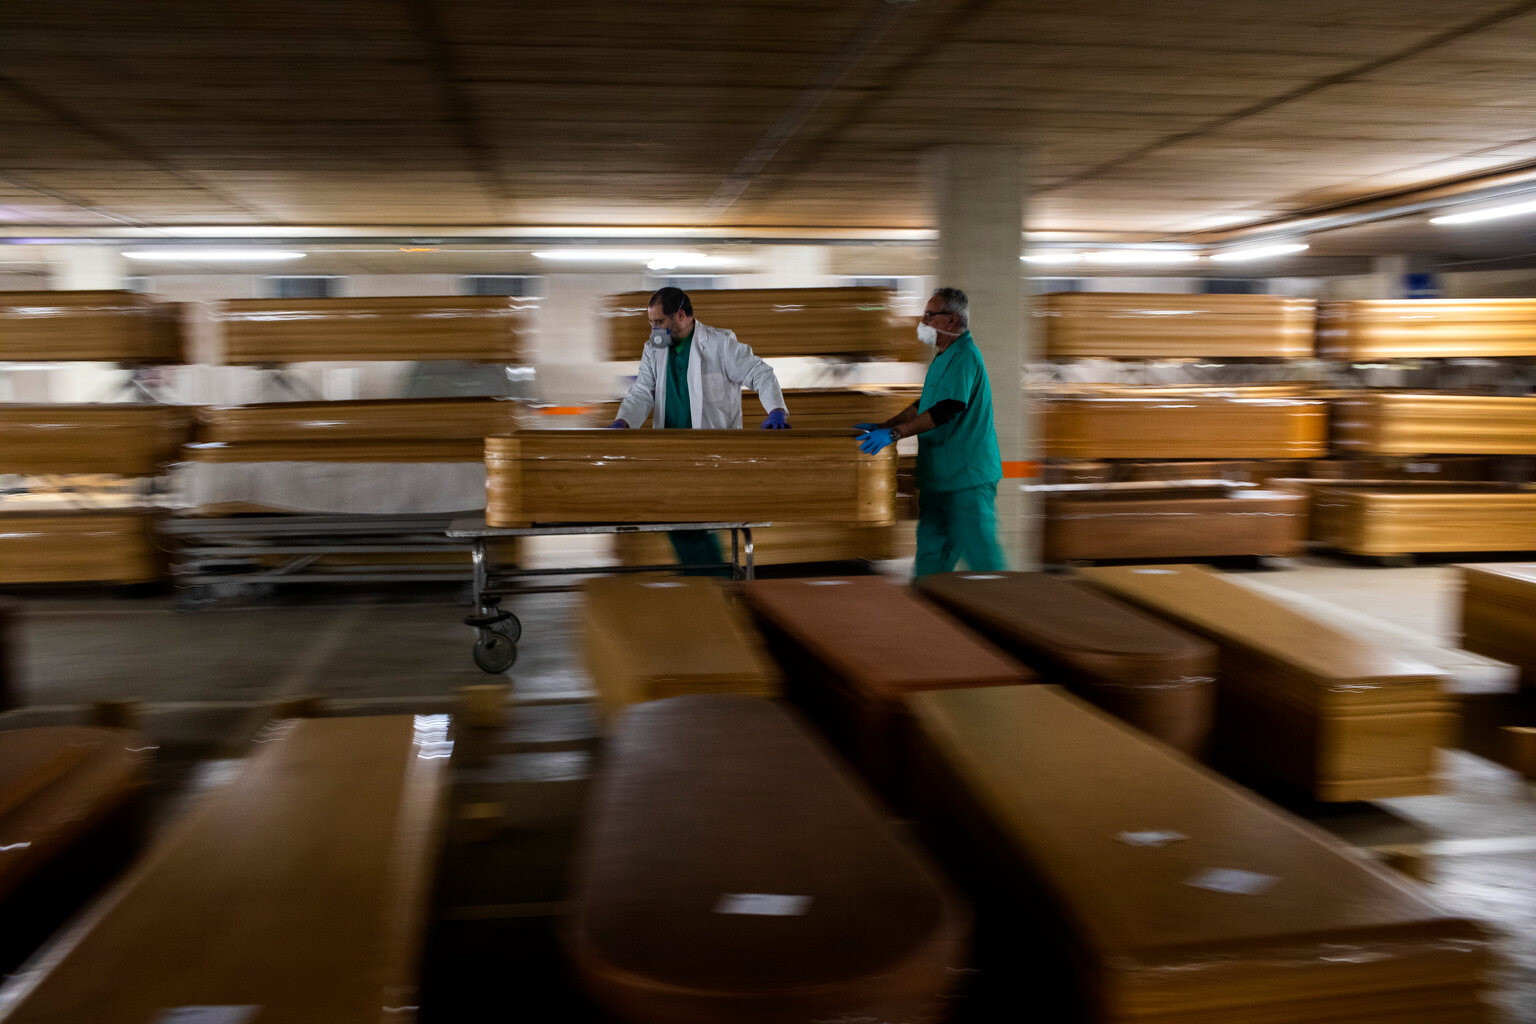  Workers move a coffin with the body of a victim of coronavirus as others coffins are stored waiting for burial or cremation at the Collserola morgue in Barcelona, Spain, Thursday, April 2, 2020. (AP Photo/Emilio Morenatti) 